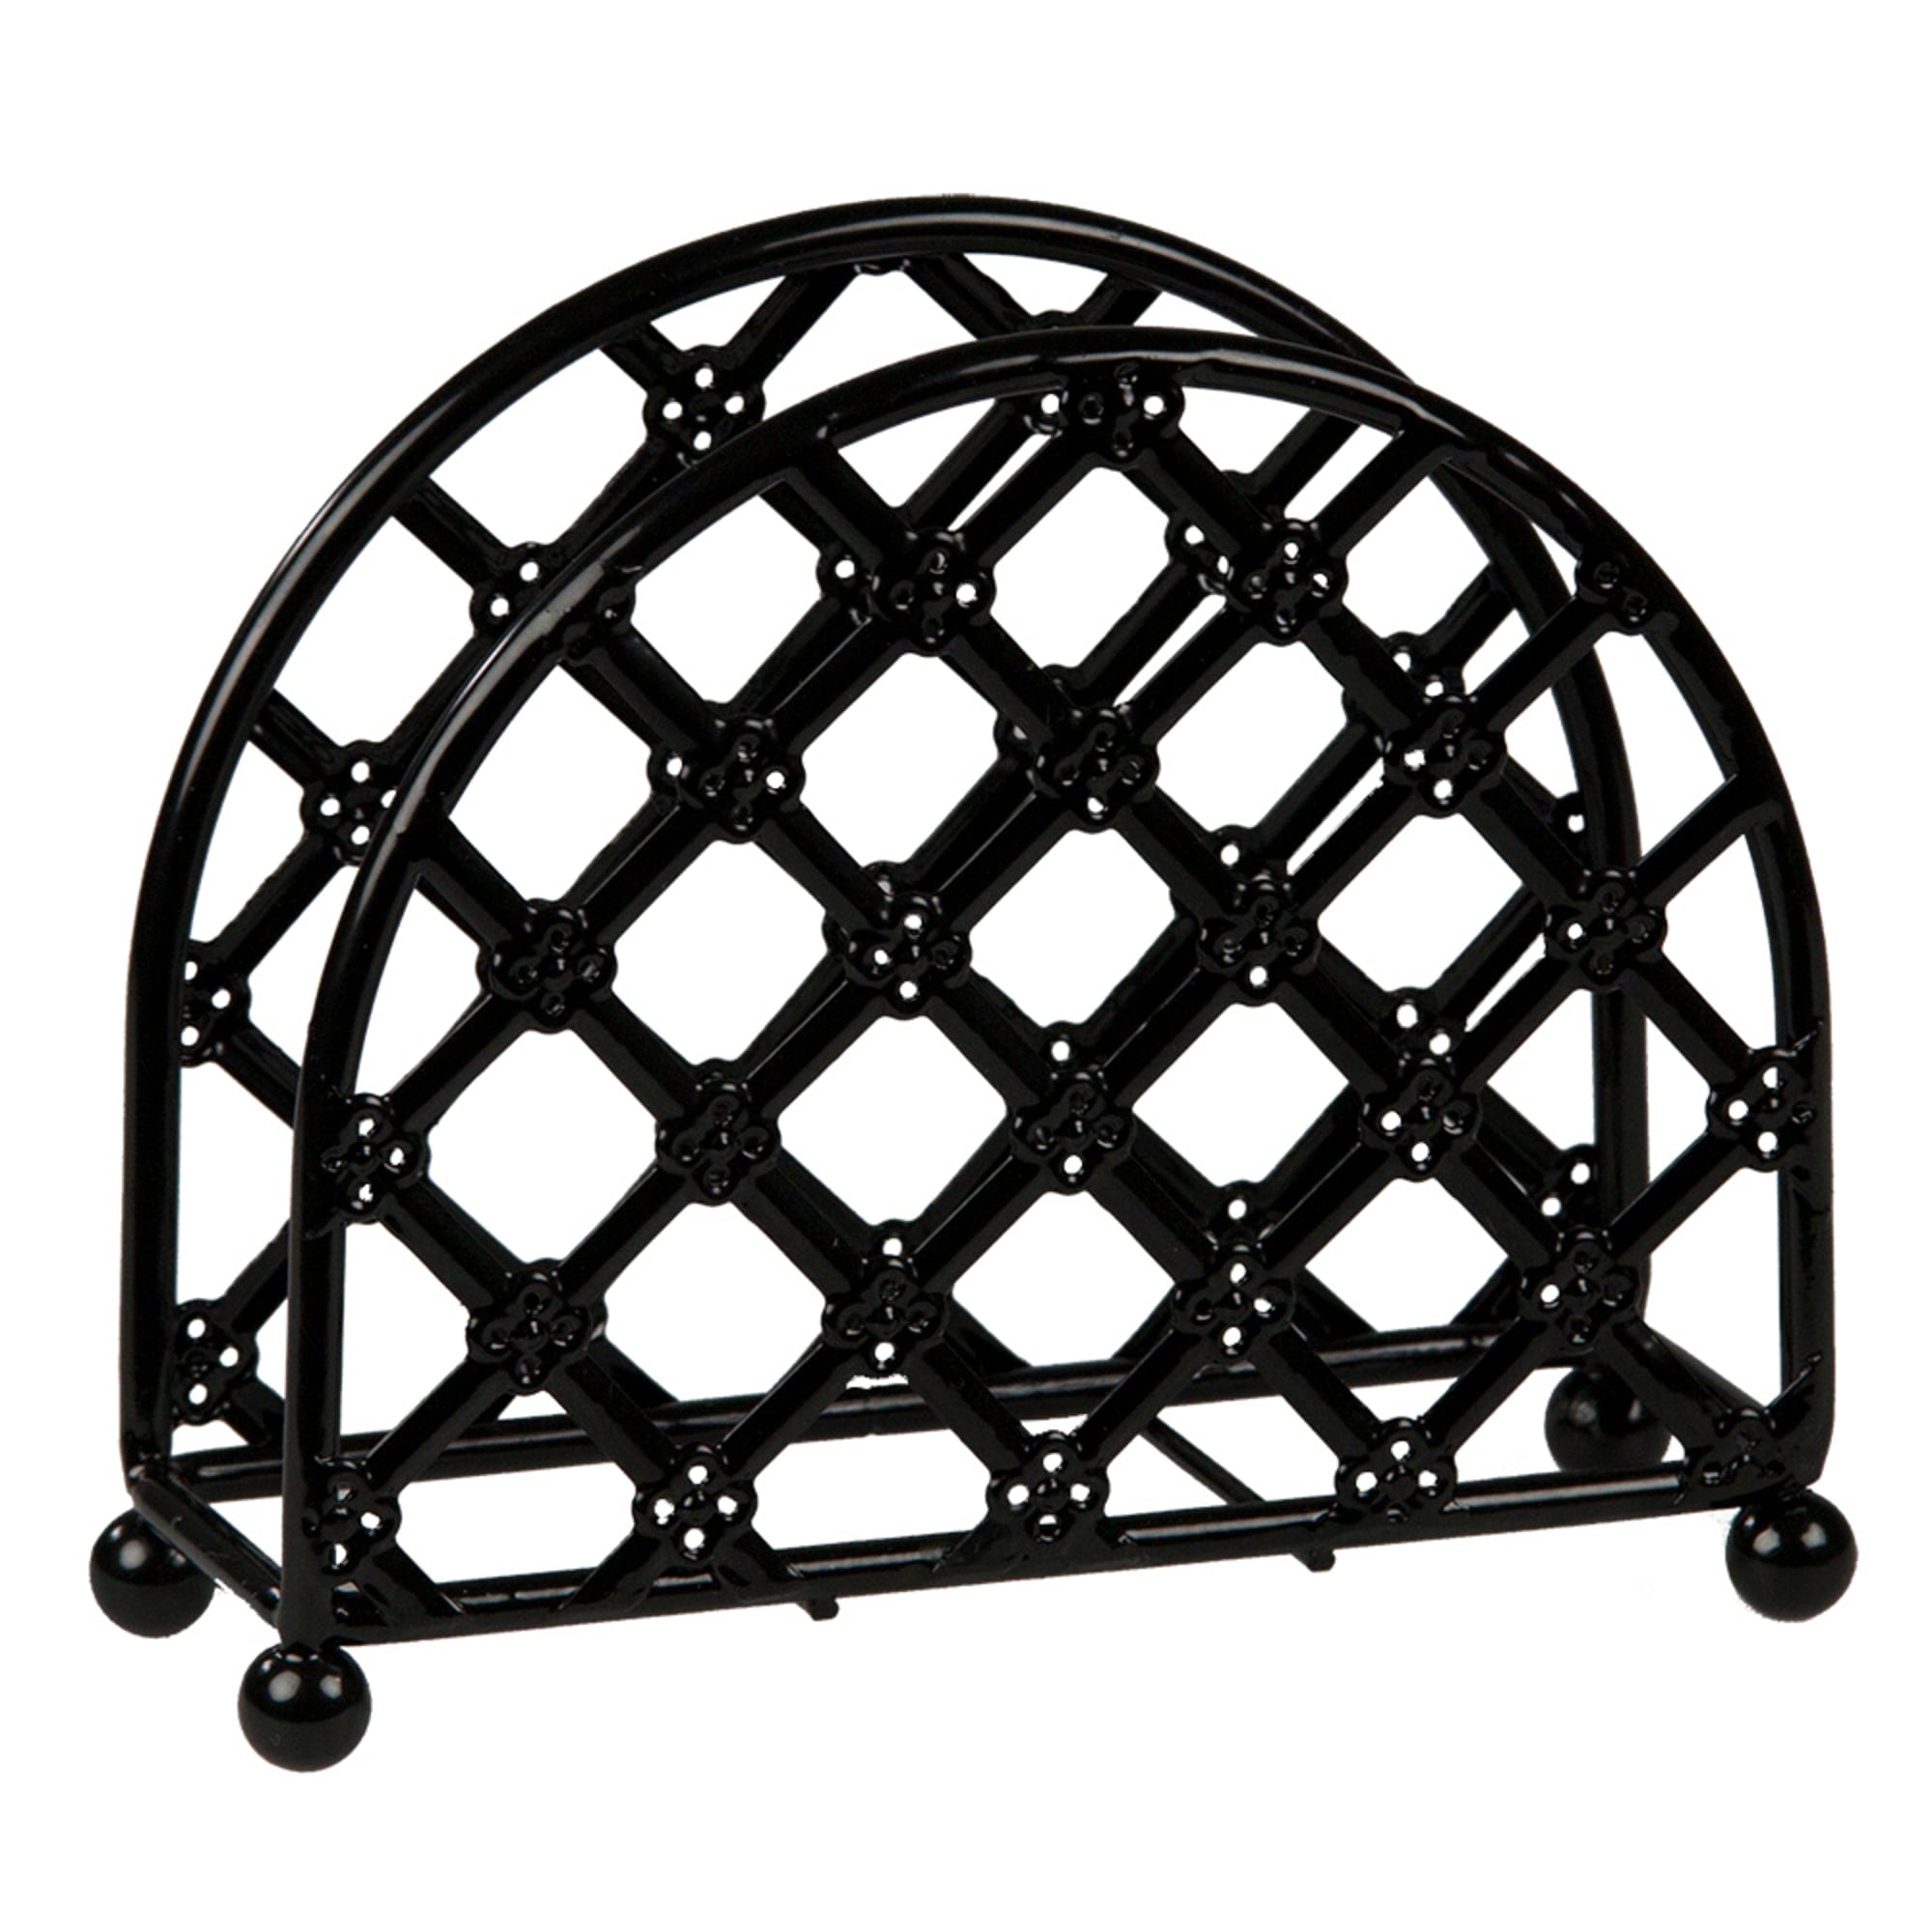 Home Basics Lattice Collection Free-Standing Napkin Holder, Black $4.00 EACH, CASE PACK OF 12